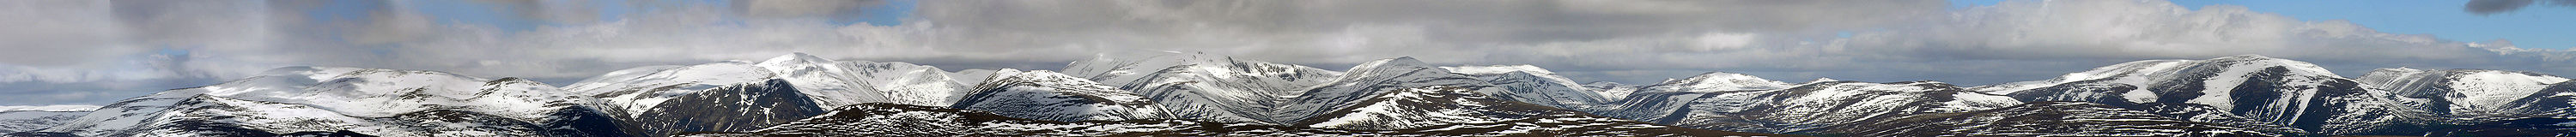  The Cairngorms from Càrn Liath in the Grampians